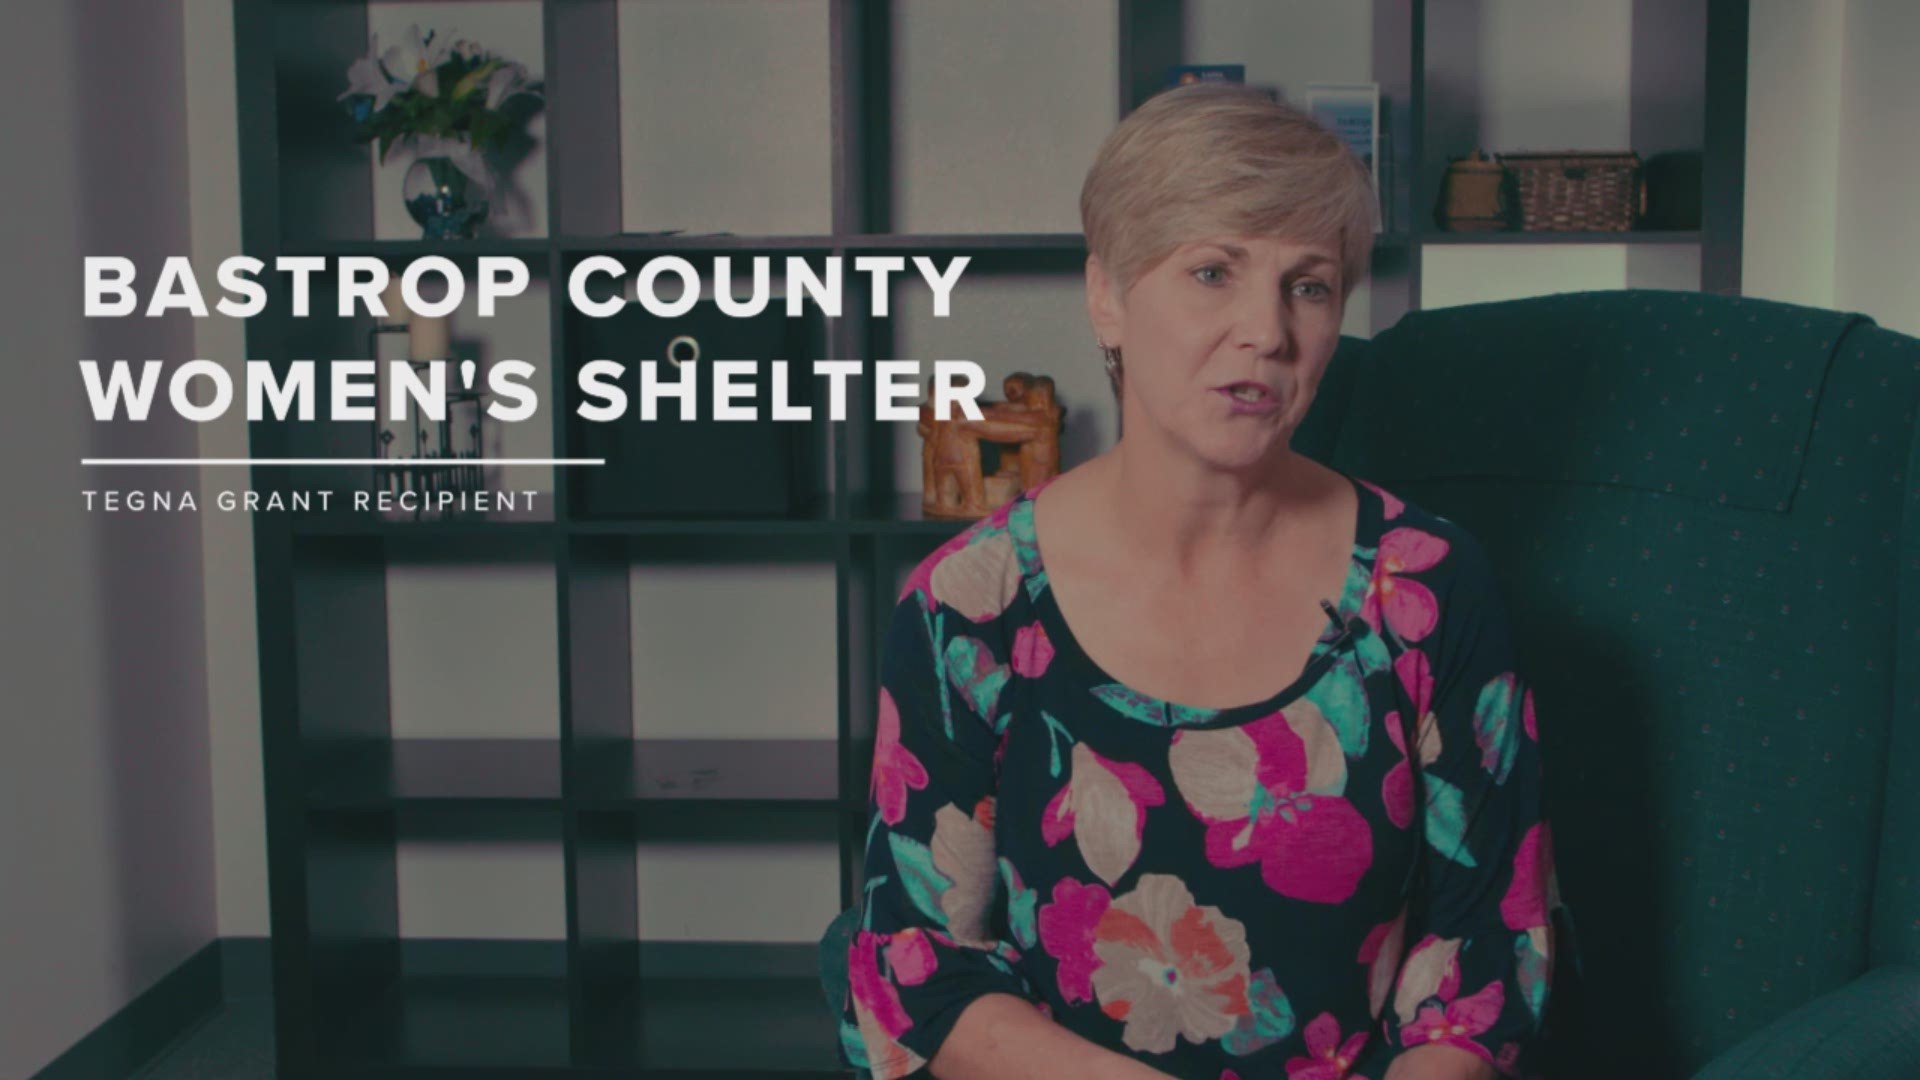 Interview with Bastrop County Women's Shelter's Executive Director Sherry Murphy